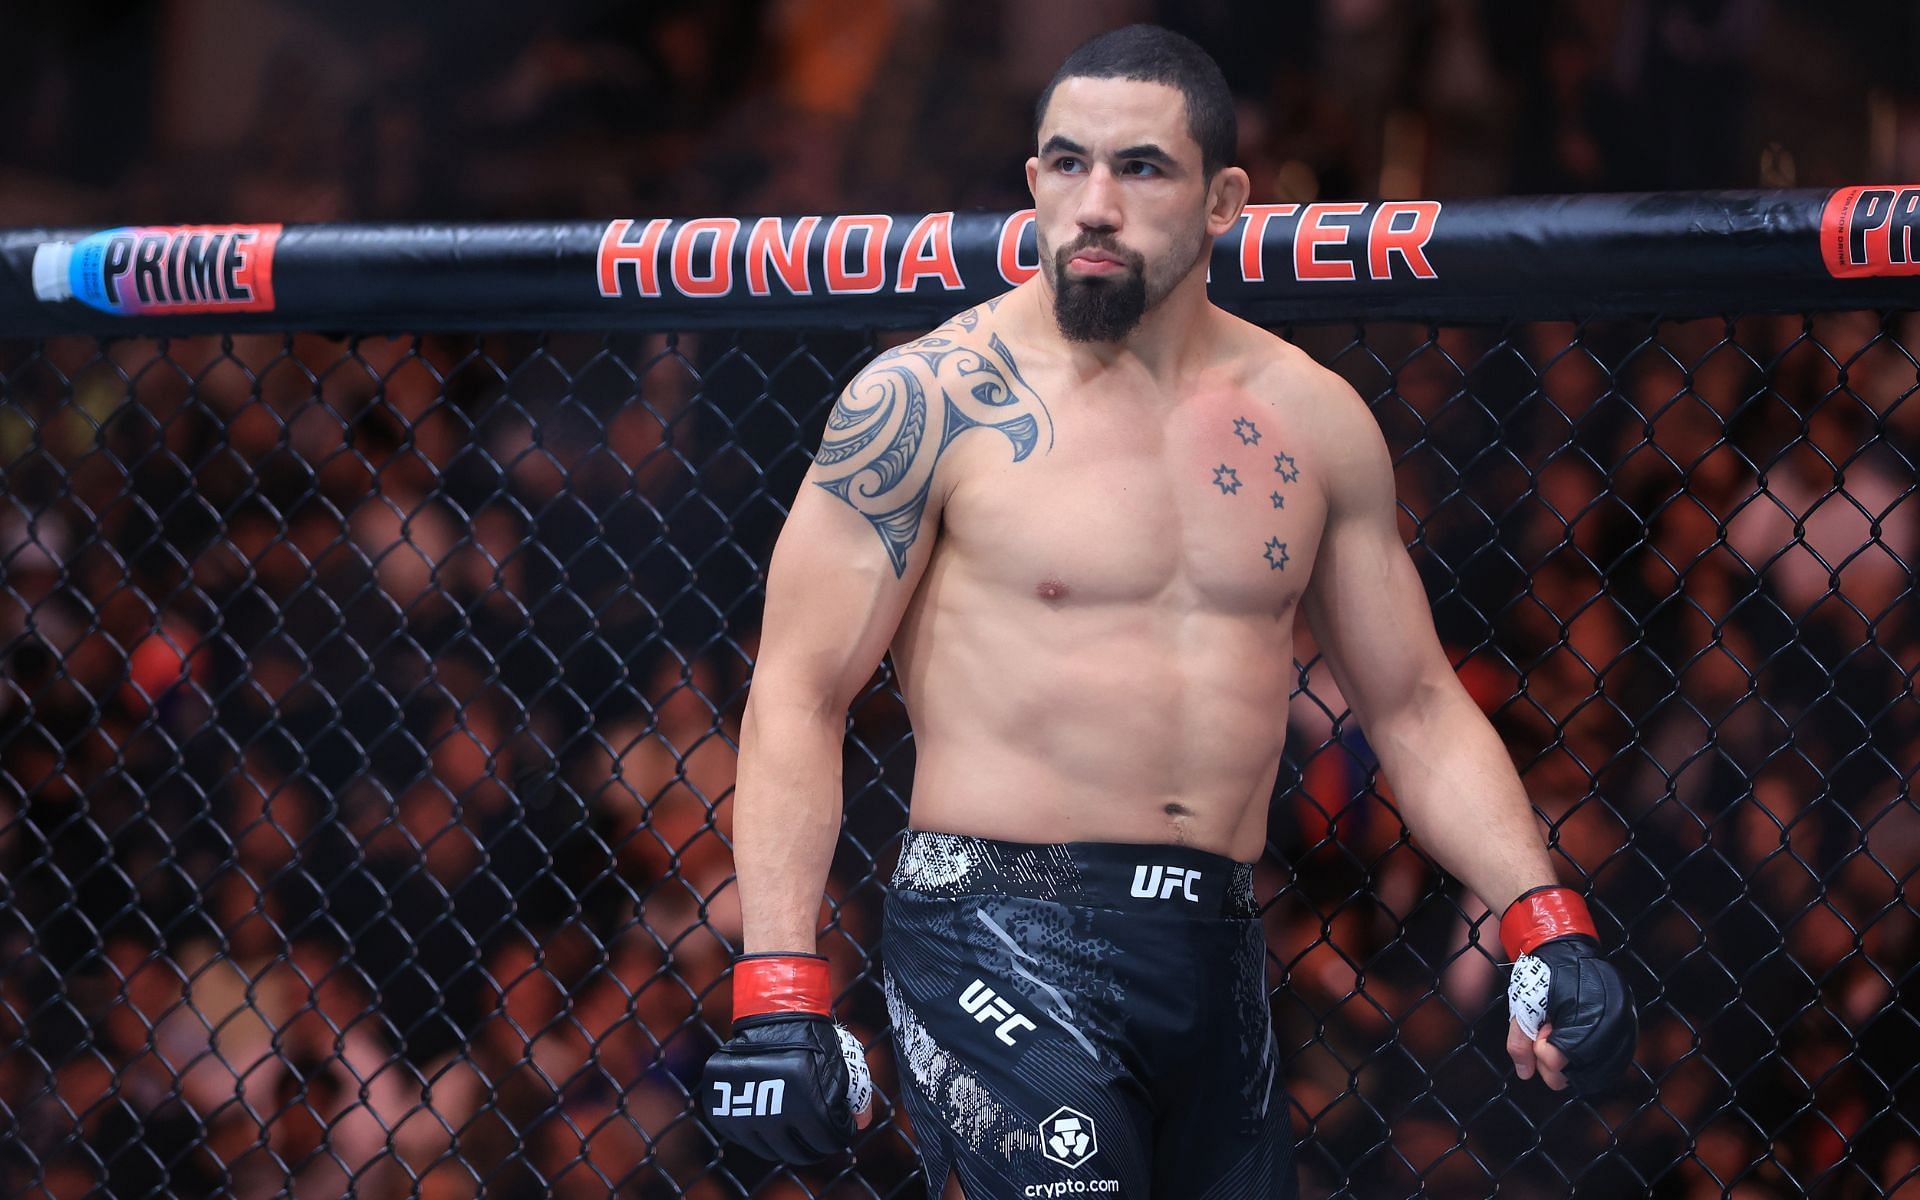 Robert Whittaker is counted among the most well-rounded fighters in the UFC today [Image courtesy: Getty Images]